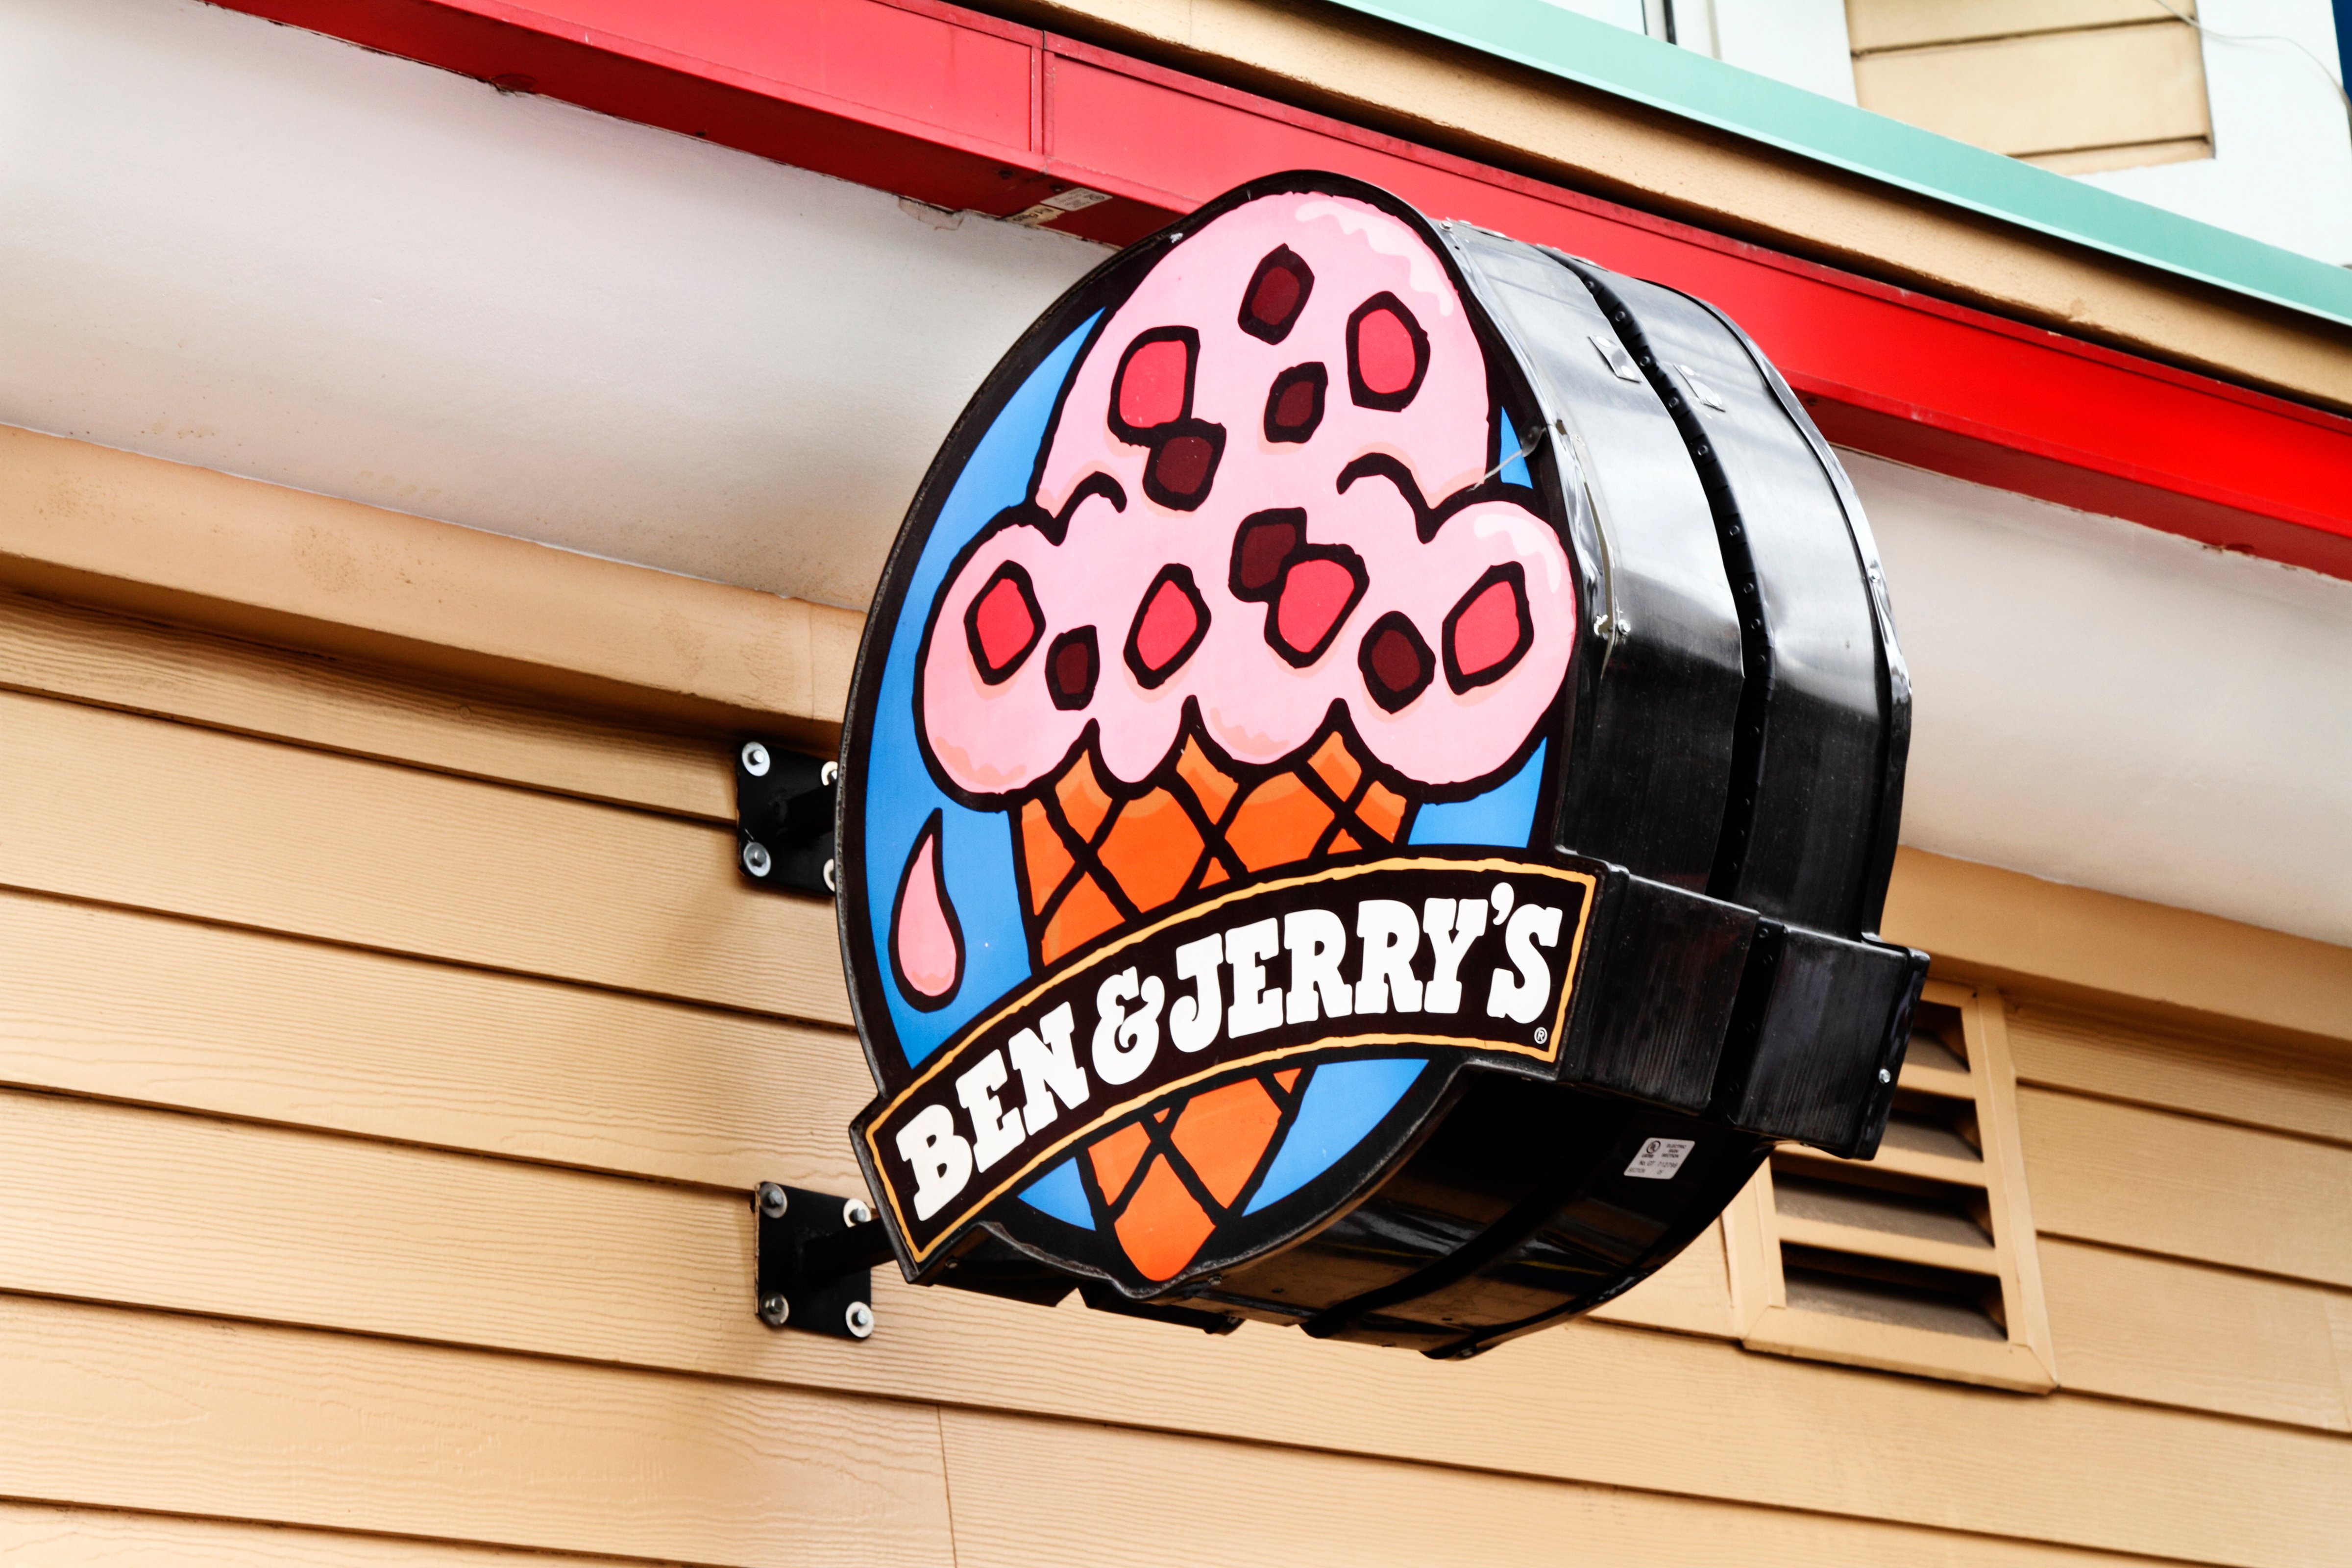 A Ben and Jerry's Ice Cream shop sign on an exterior store wall in Las Vegas, Nevada.  Ben and Jerry's is a national chain of ice cream shops that uses all natural ingredients to make gourmet ice cream in many flavors. (NoDerog,Getty Images)